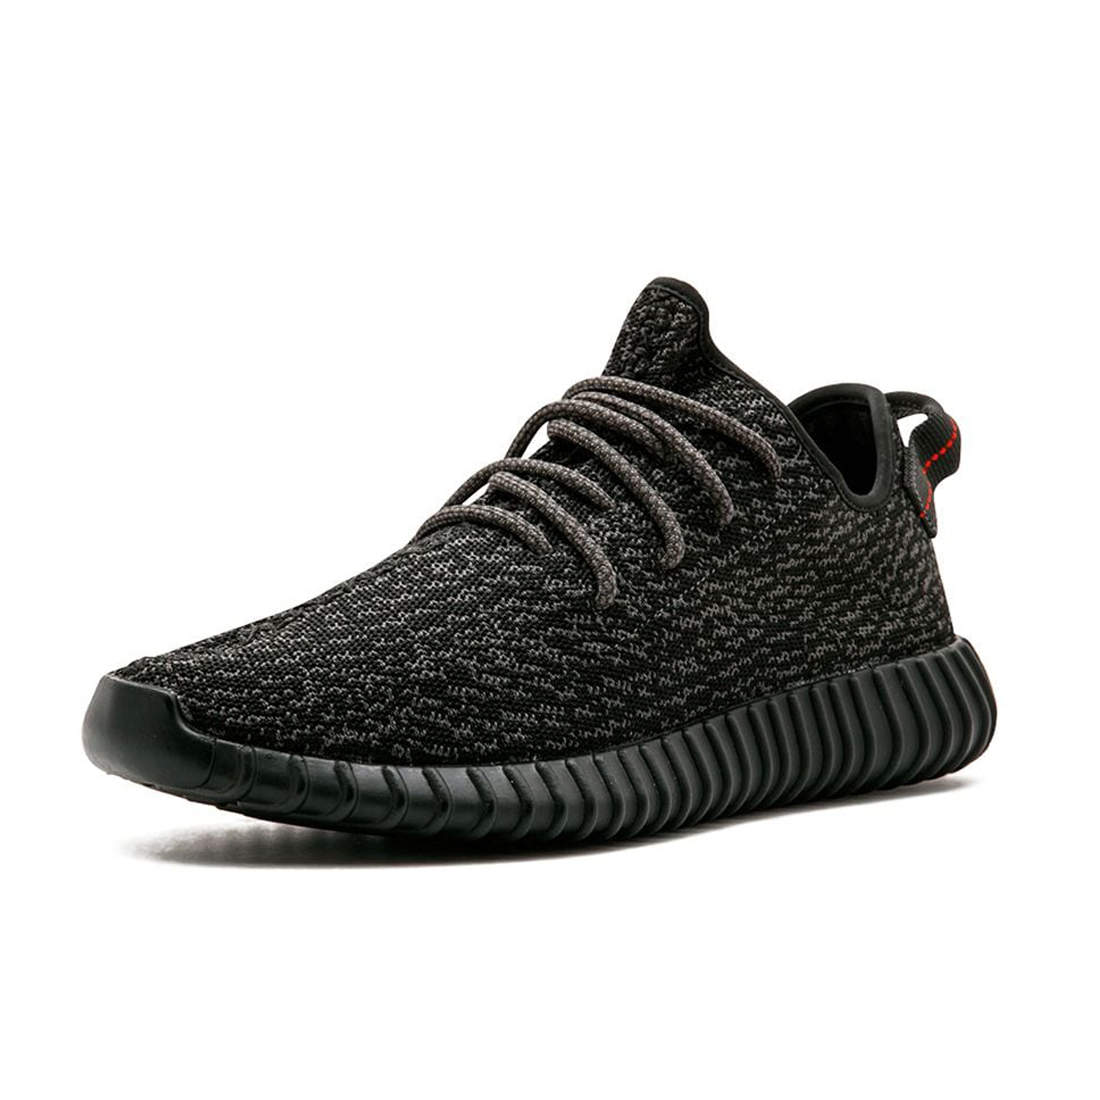 Yeezy Boost 350 Pirate Black – PK-Shoes